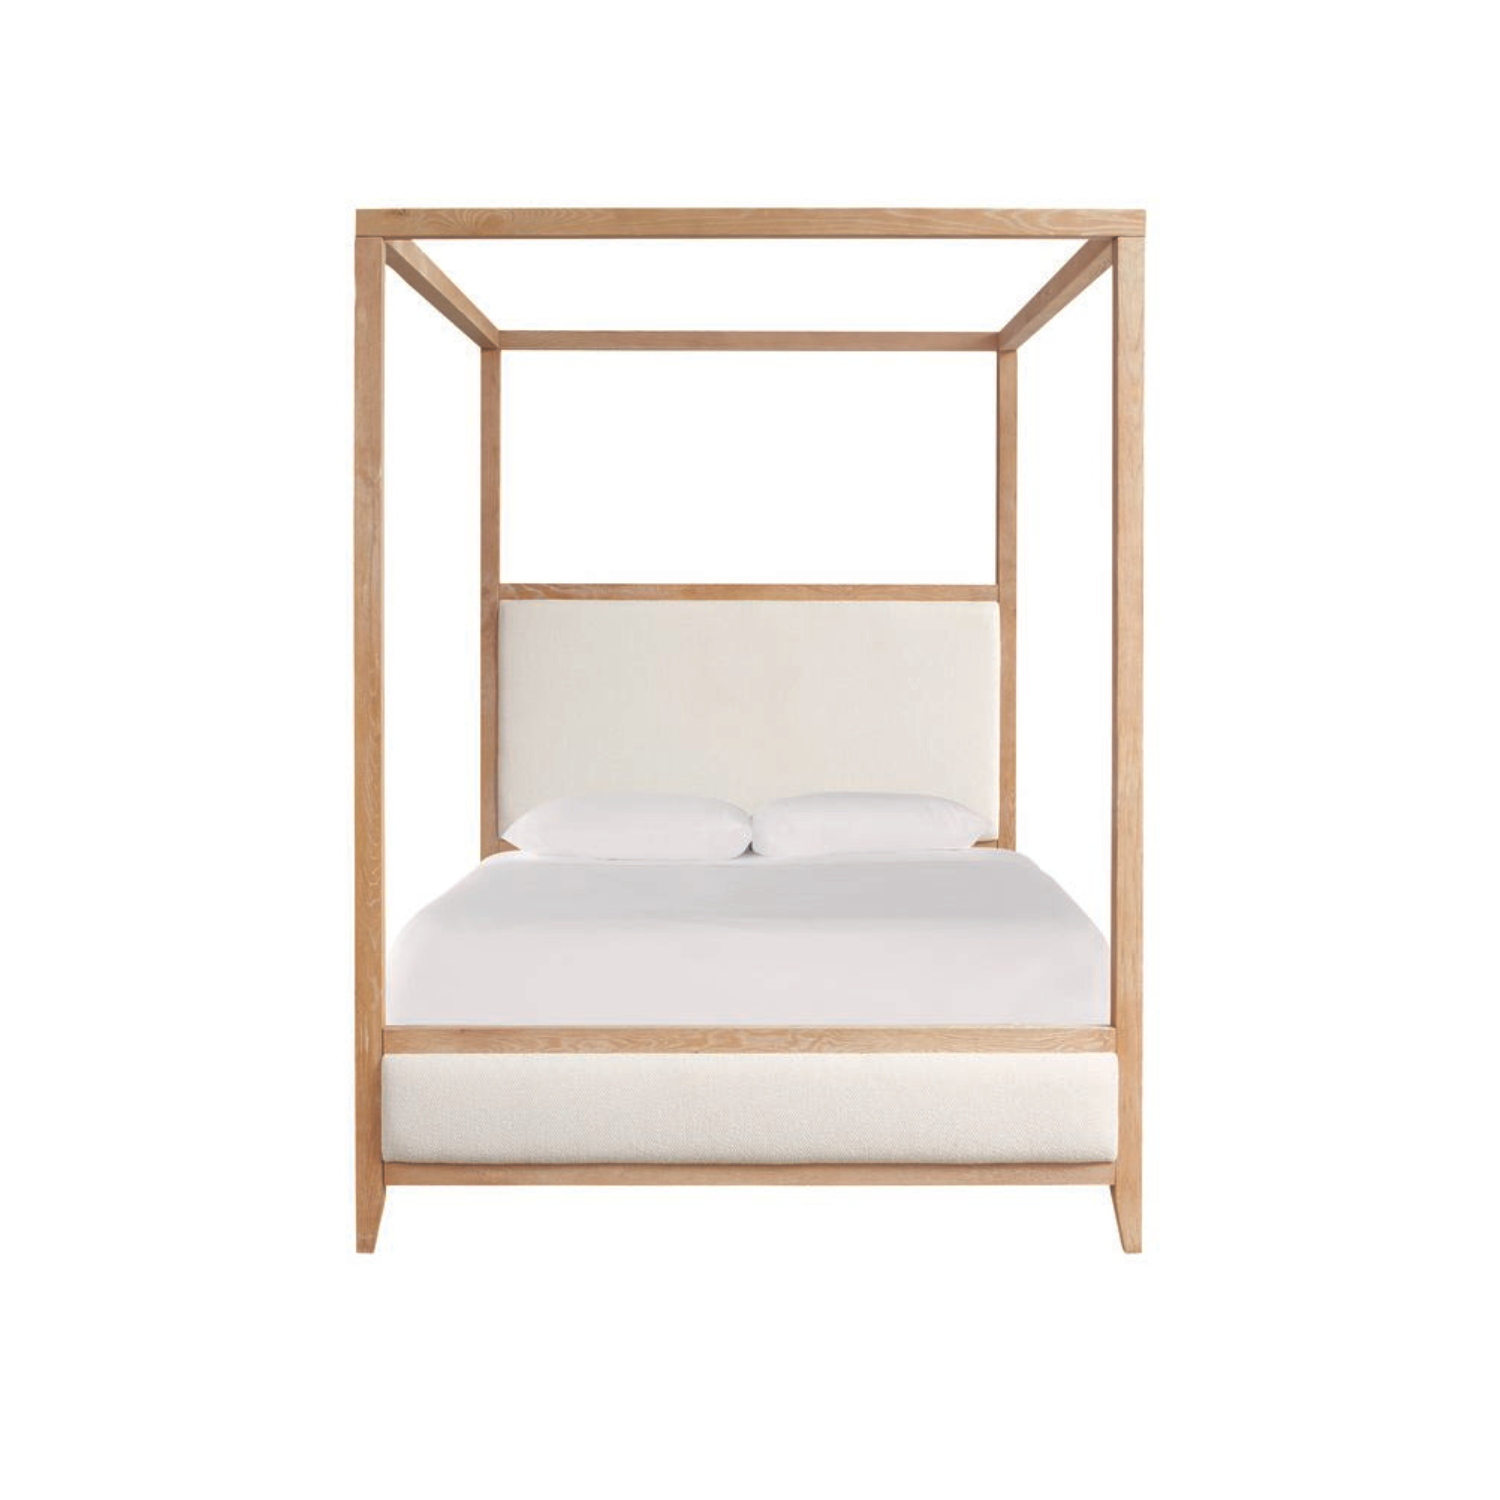 Courtland Upholstered Blond White Oak King Canopy Bed